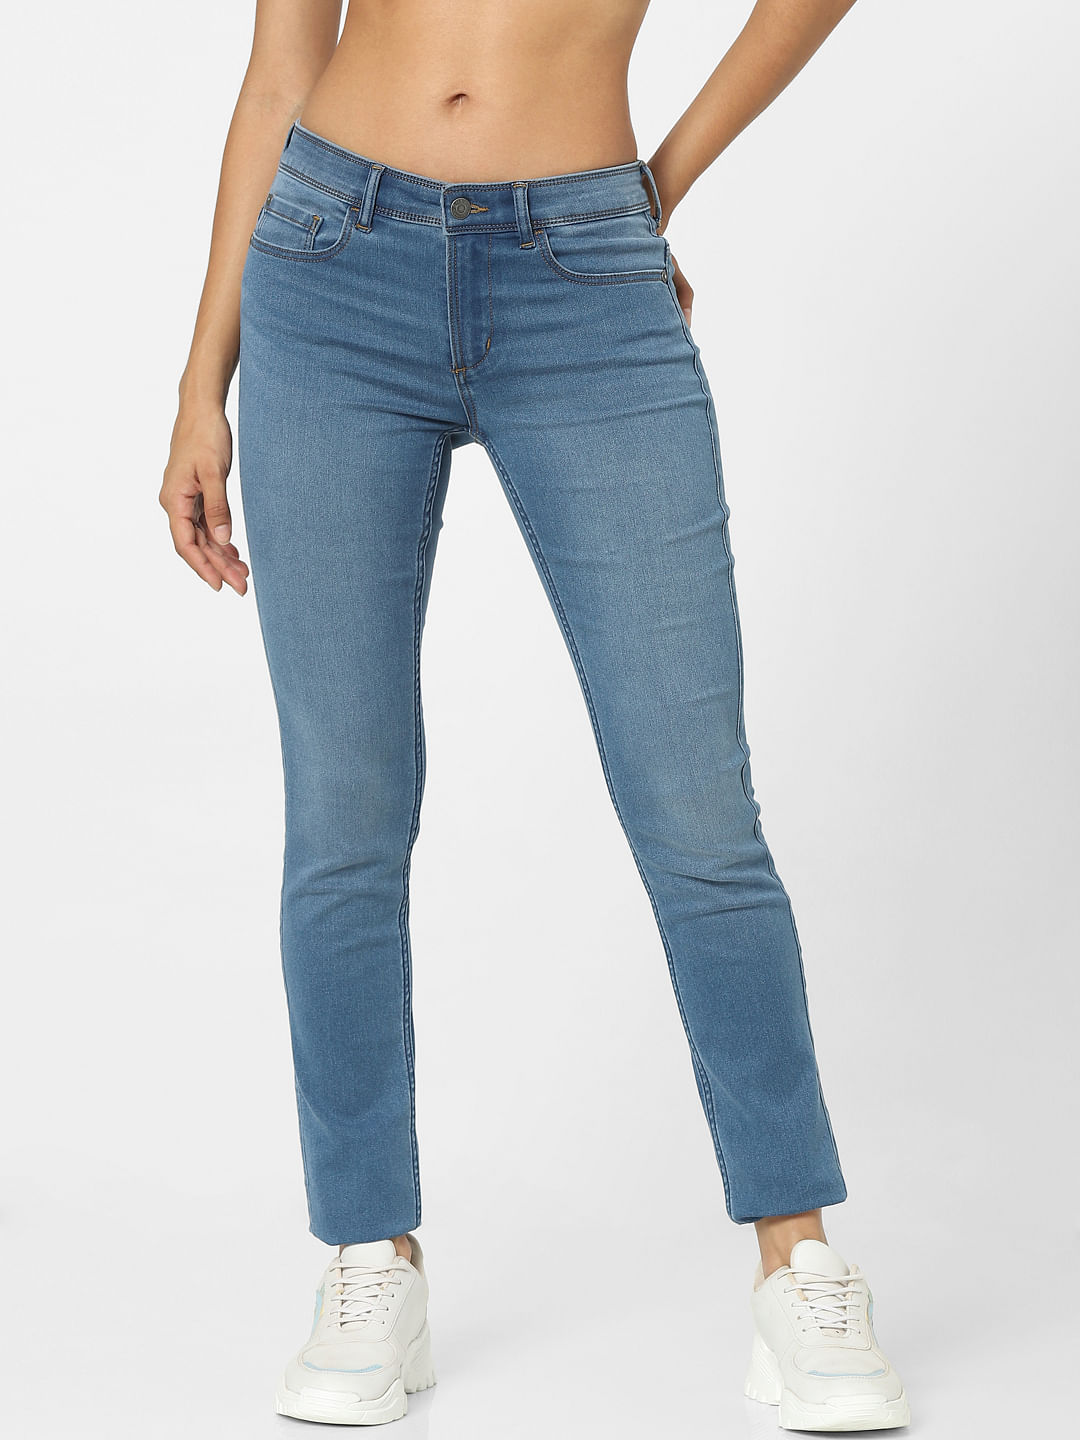 Blue Faded Denim Jeans For Ladies at Rs.385/Piece in delhi offer by Dev  Garments